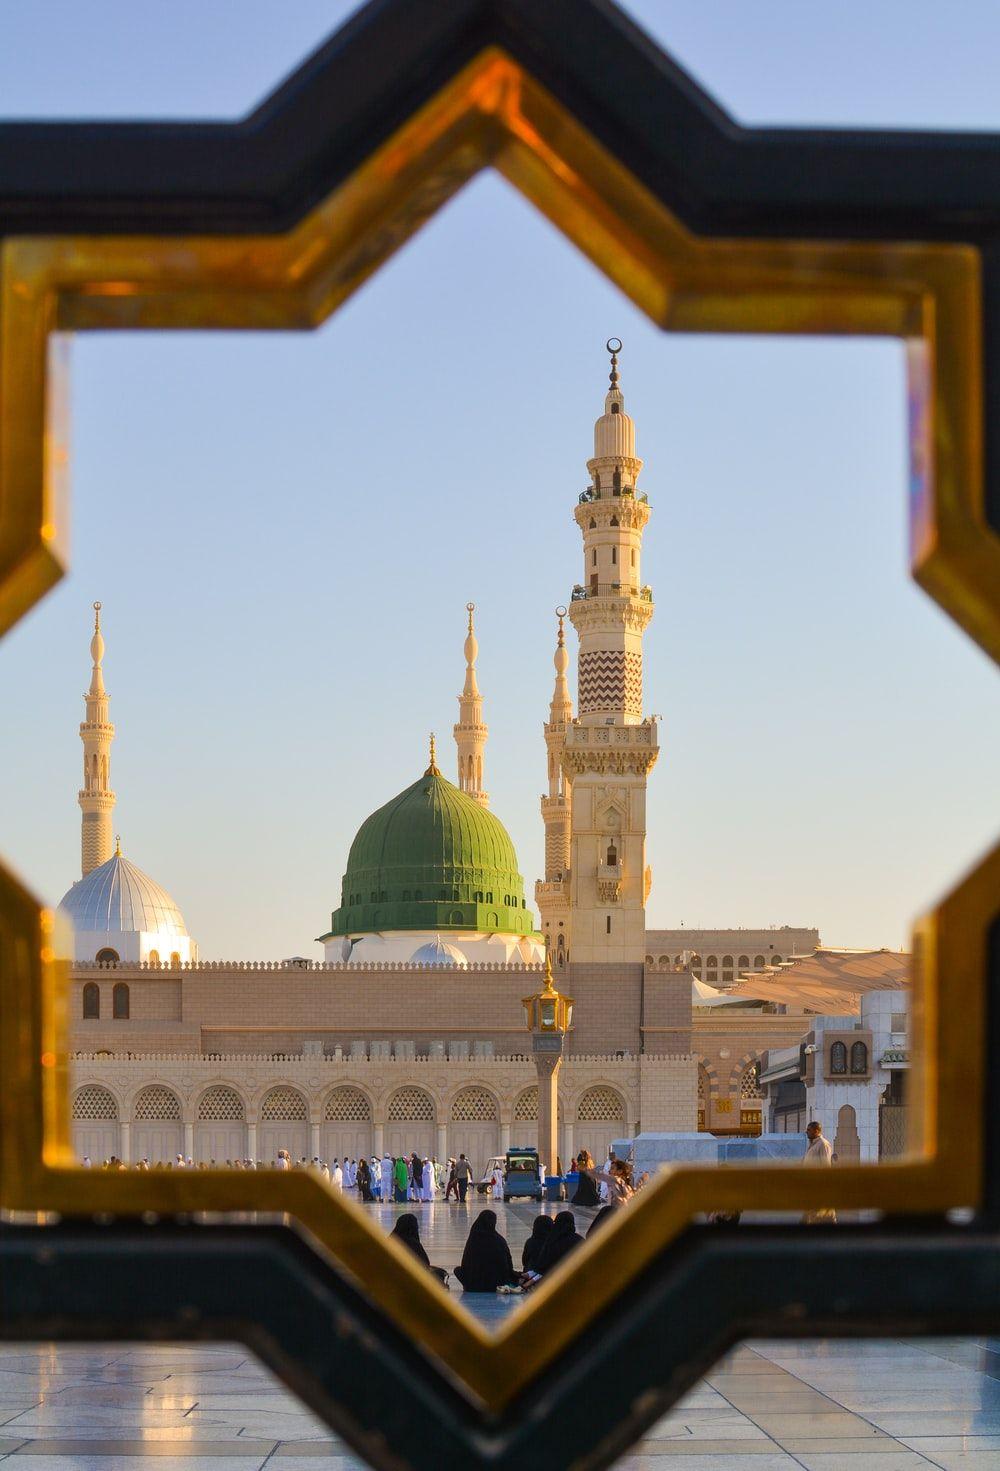 30+ Al-Masjid Al-Nabawi Apple/iPhone 5 (640x1136) Wallpapers - Mobile Abyss